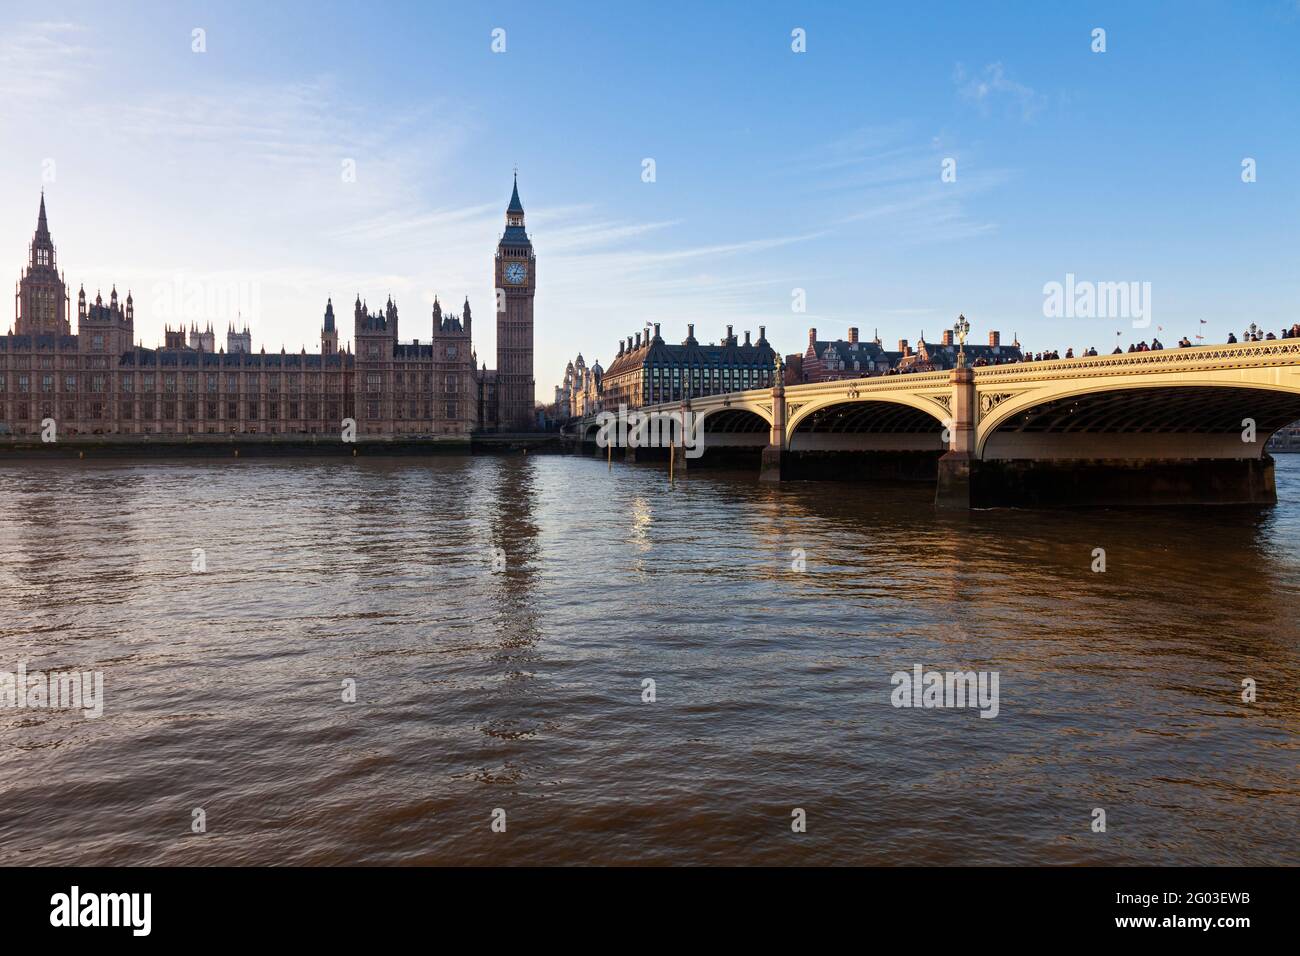 UK, England, London, Westminster Bridge and Houses of Parliament (Palace of Westminster) Stock Photo